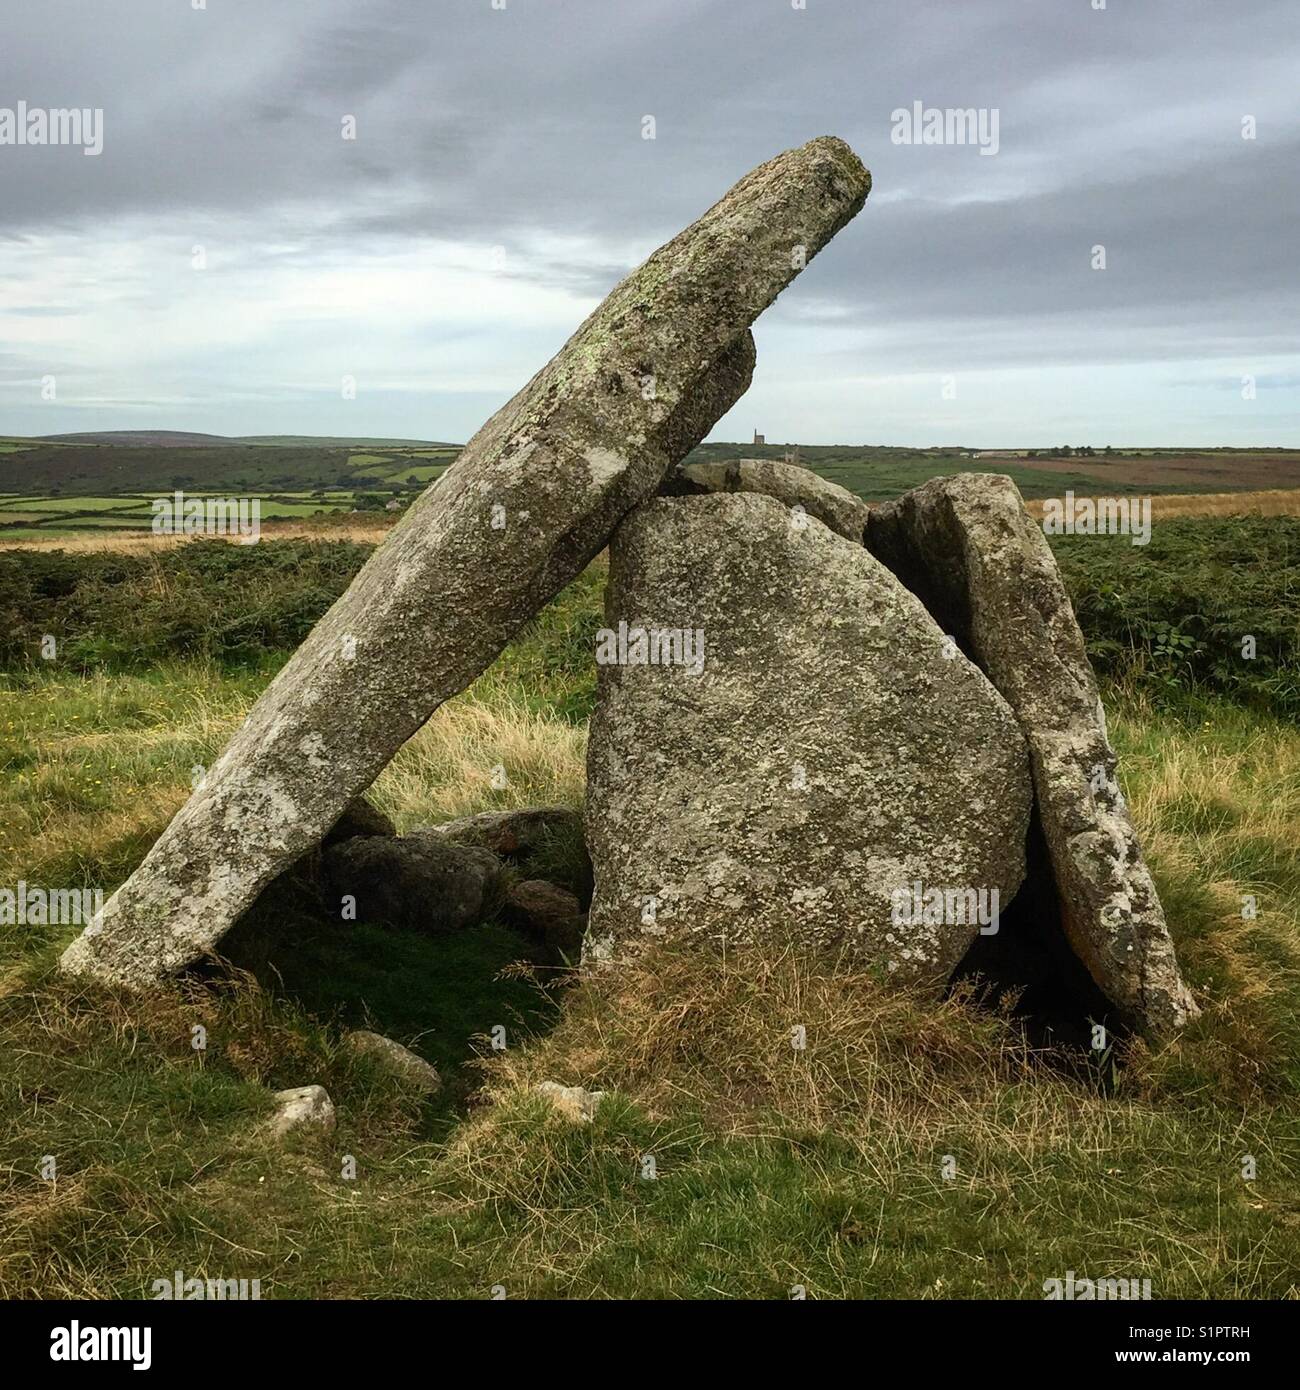 Mulfra Quoit, a Neolithic dolmen in the county of Cornwall in England. It stands on Mulfra Hill to the north of the hamlet of Mulfra. Stock Photo